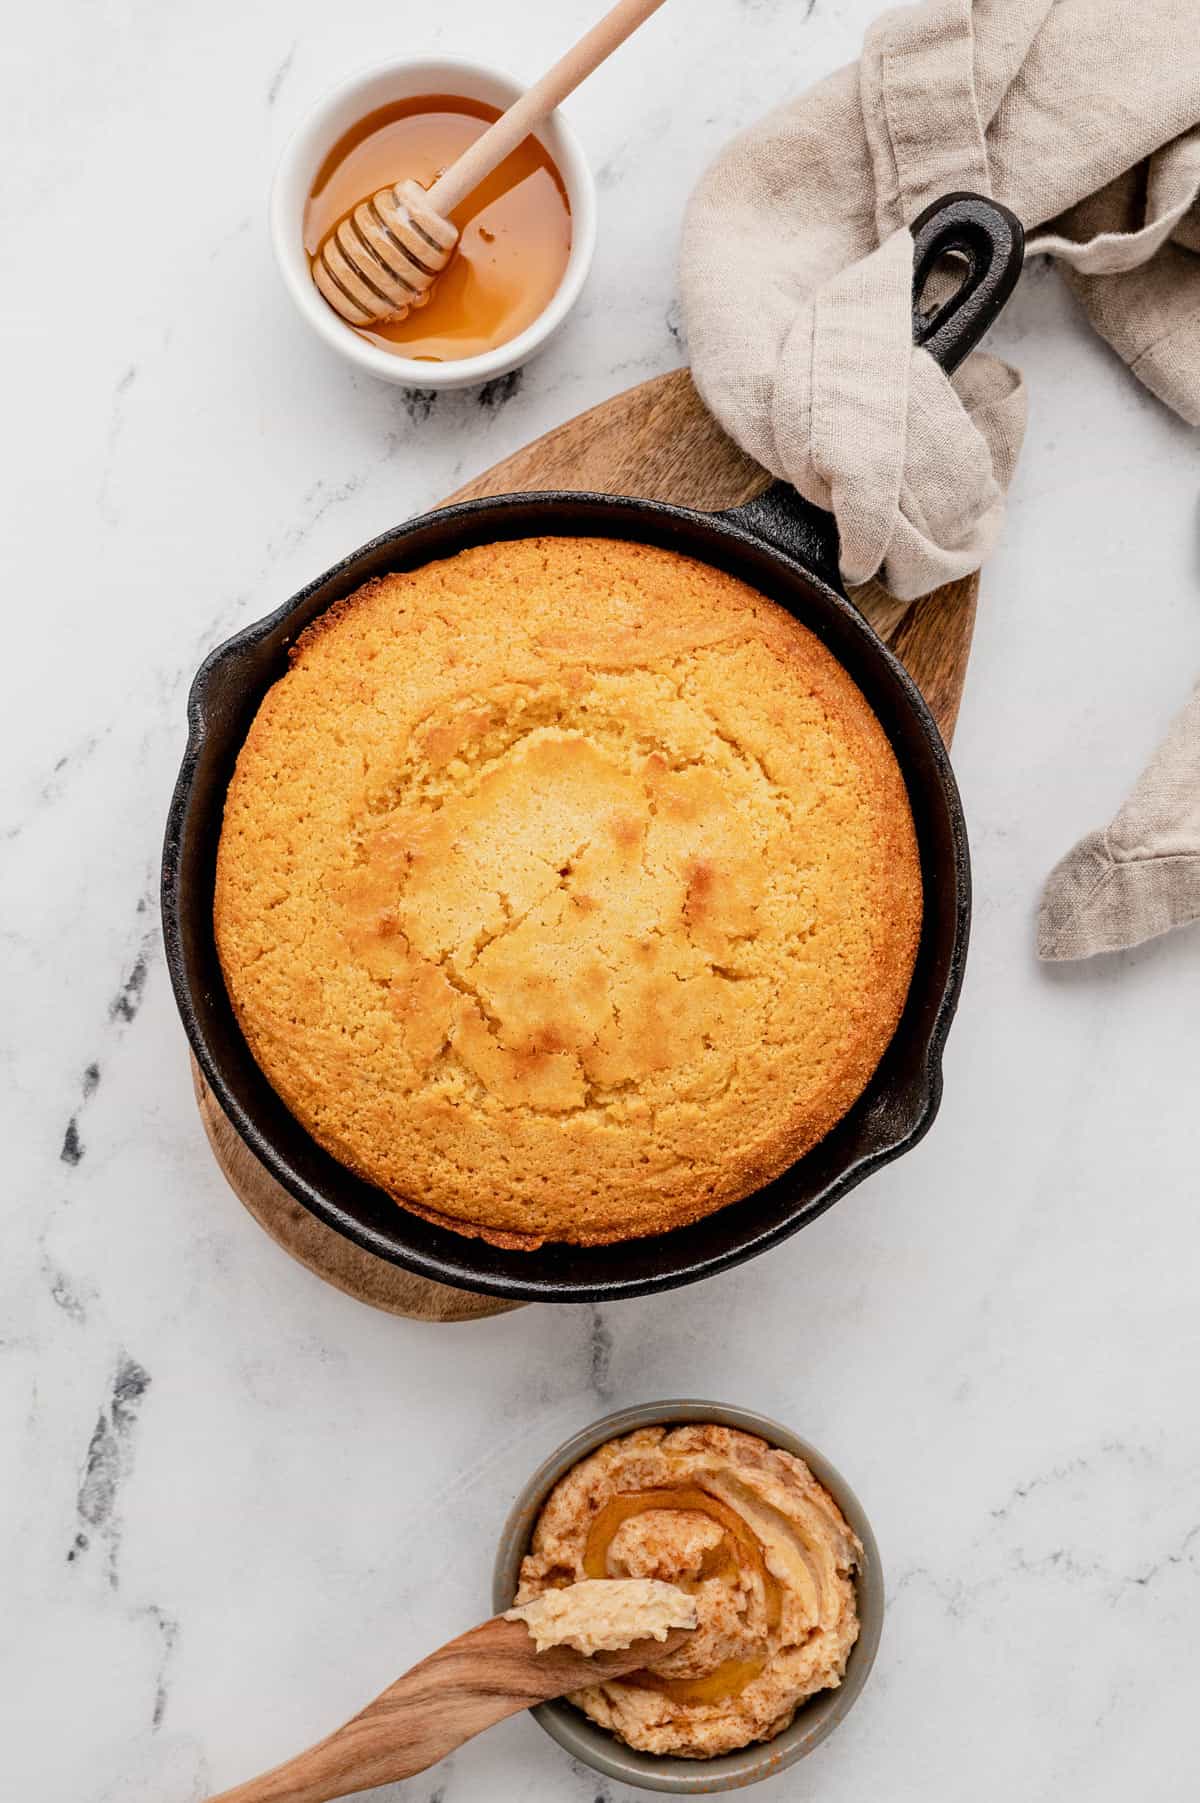 Overhead view of a skillet cornbread with some honey and honey butter on the side.